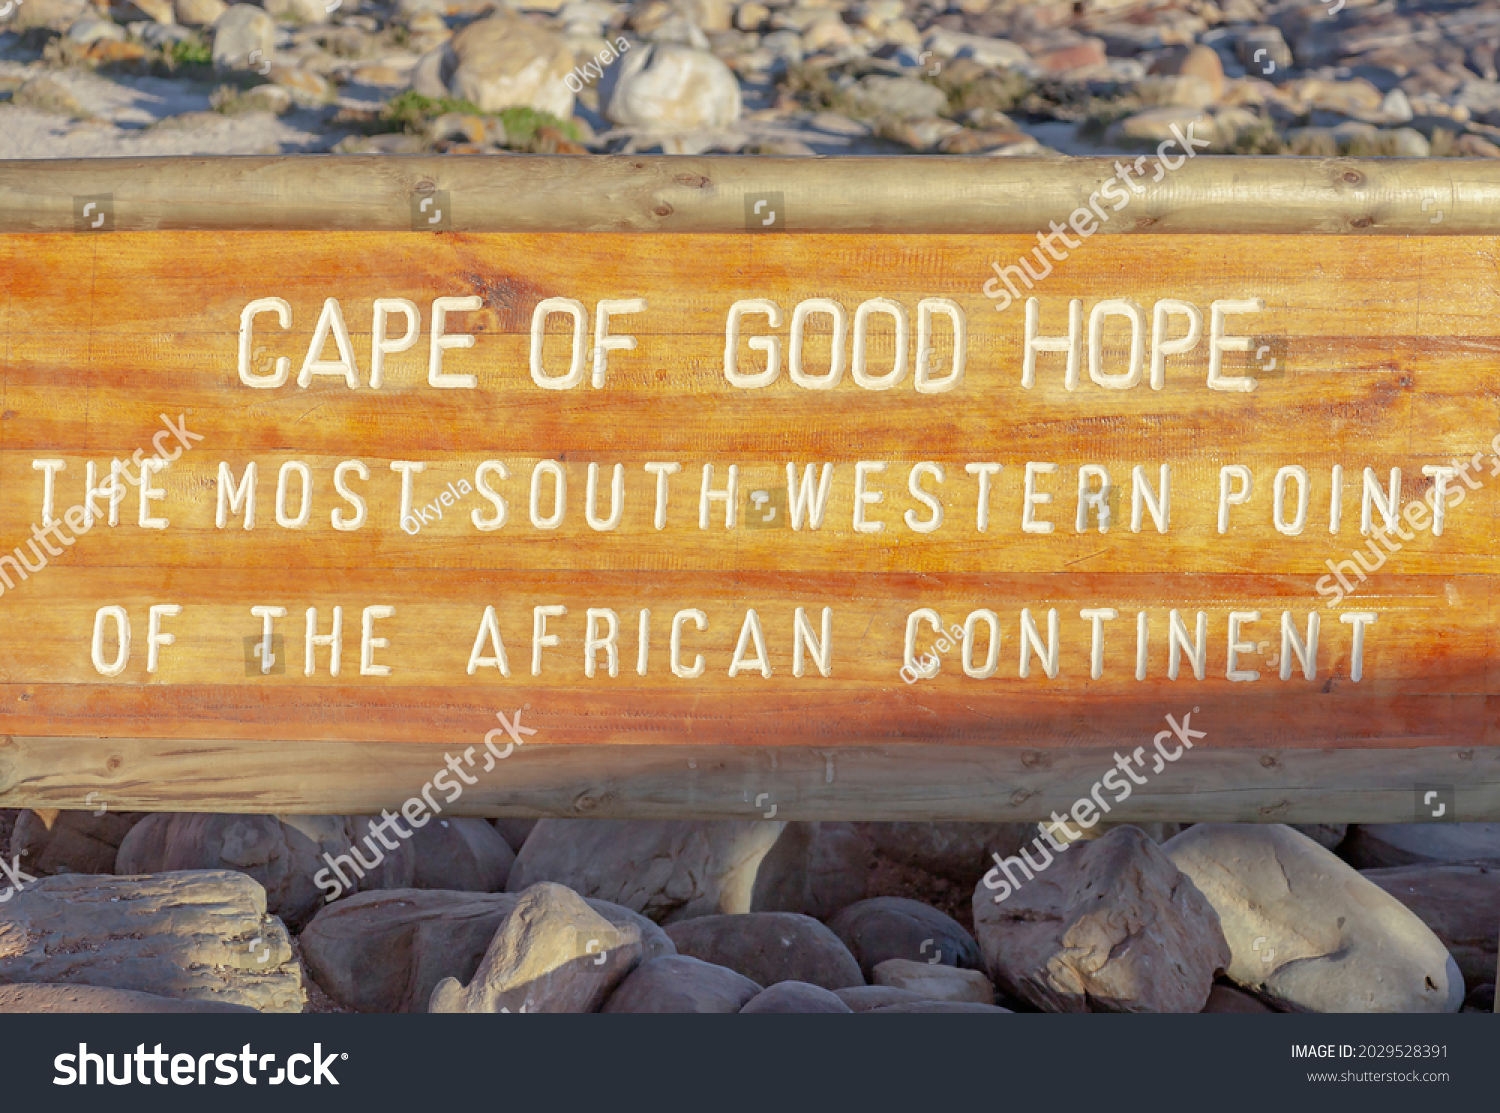 Cape of Good Hope the south-western most point of the African continent - an inscription on  wooden shield on the shore of the cape near the water.  An nformation sign about   geographical point  #2029528391